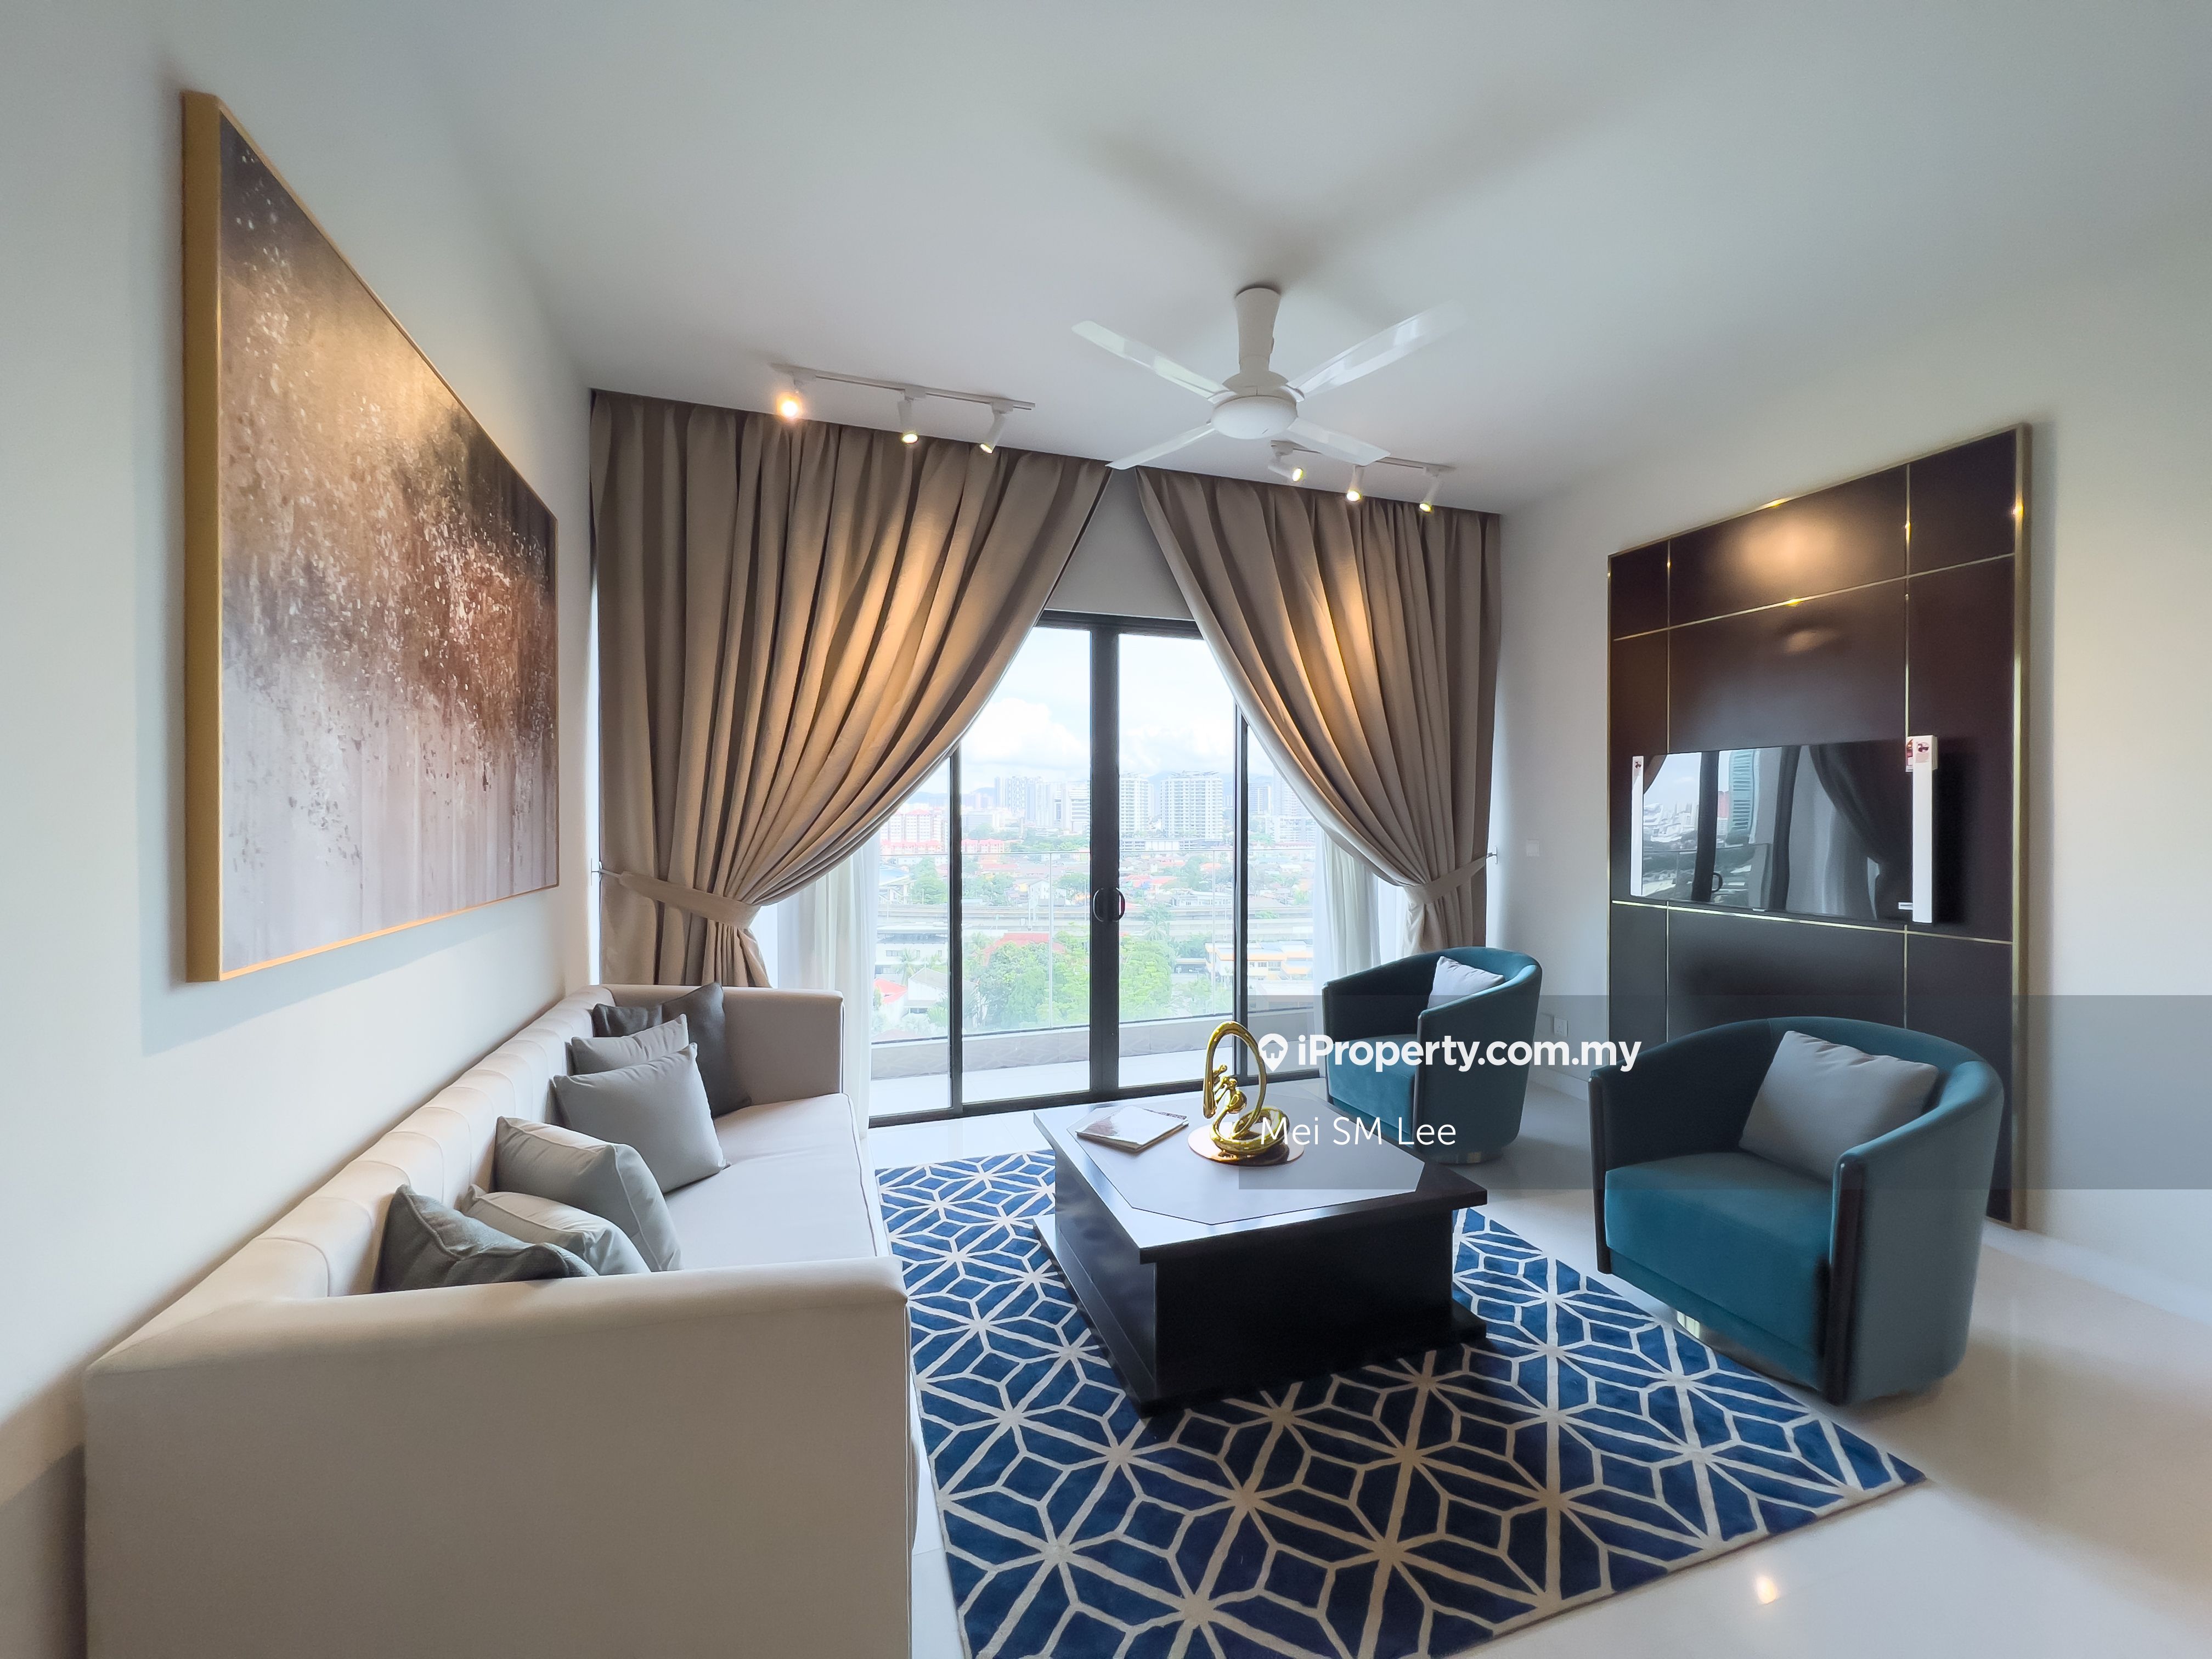 KLCC Pavilion Embassy Fully Furnished Luxury 4 Bedrooms Service Suites